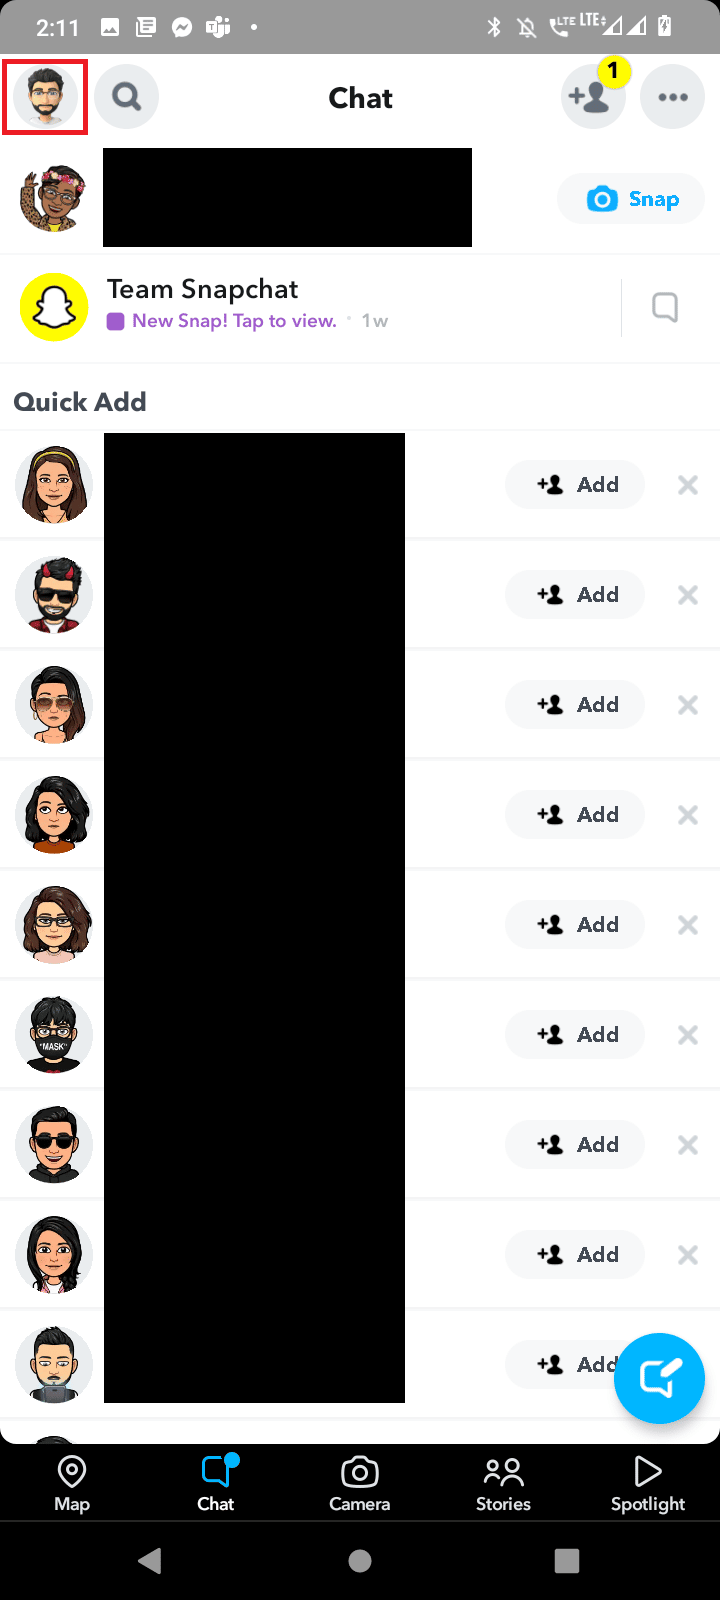 tap on the profile picture. How to Find Someone on Snapchat Without Their Username